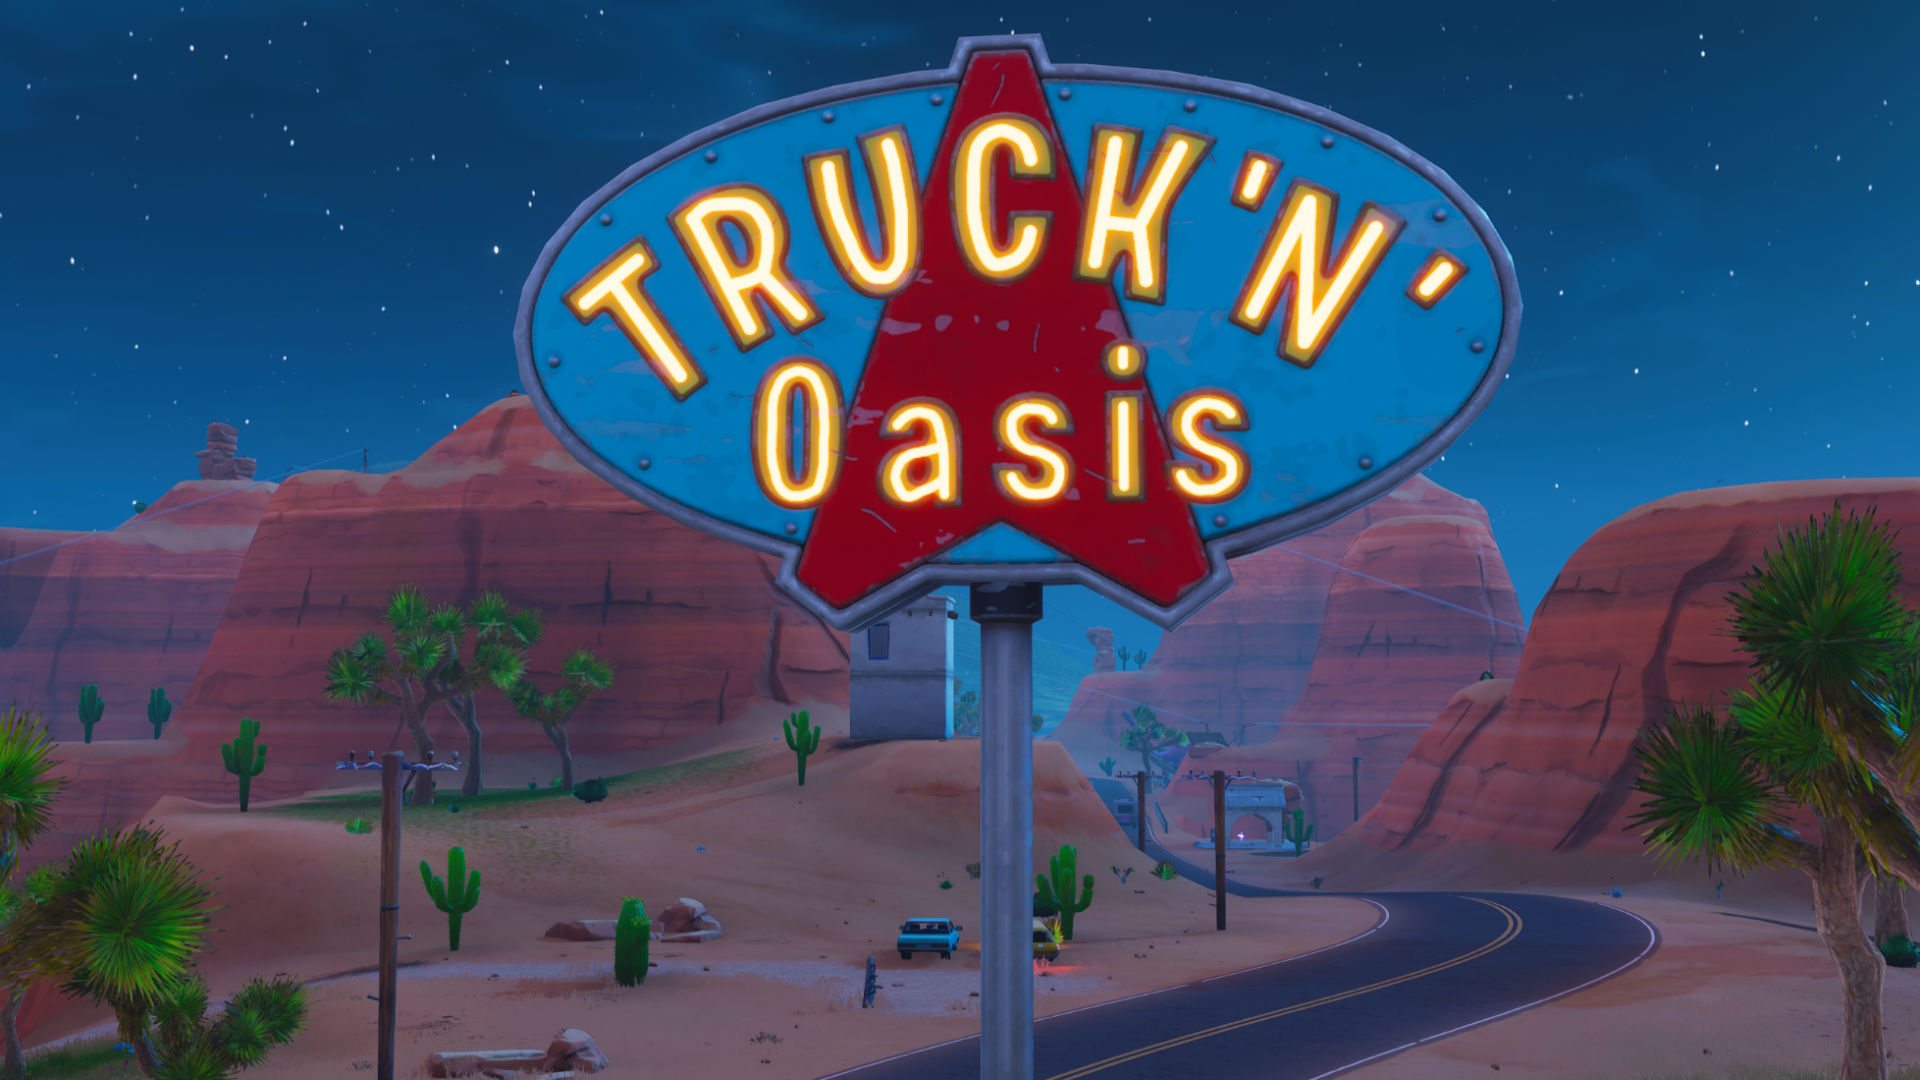 fortnite trucker s oasis location where to use keep it mello at a trucker s oasis showtime challenges - n in fortnite